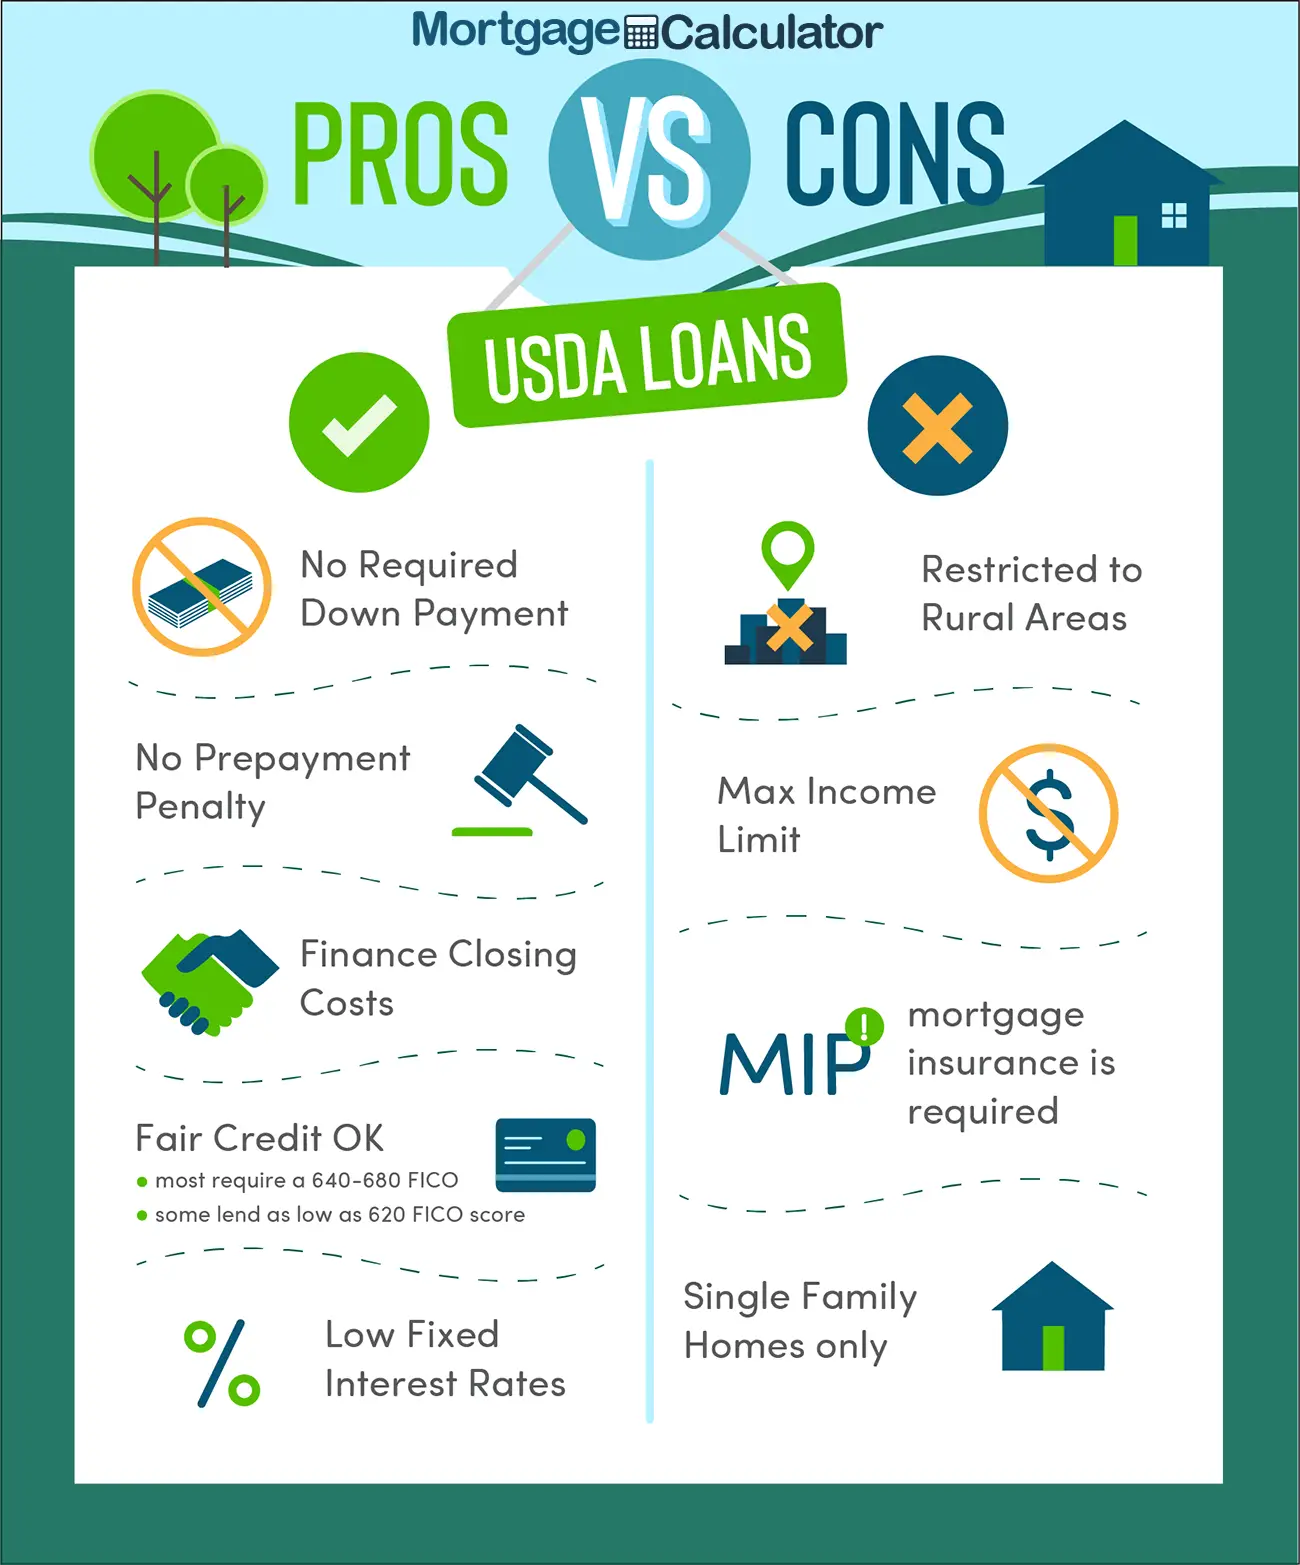 How To Calculate Closing Costs For Usda Loan